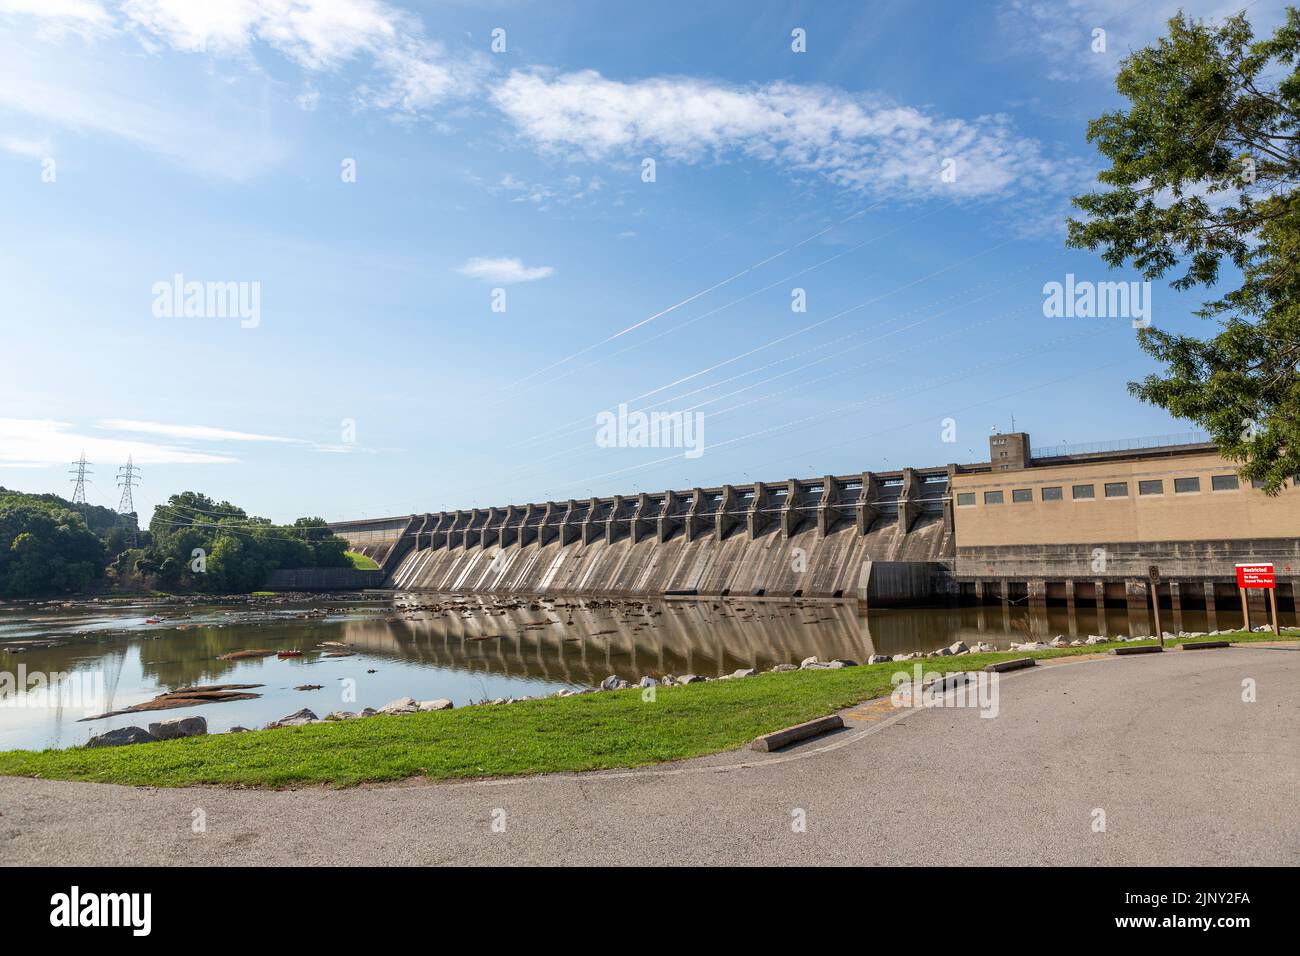 John H Kerr dam near Boydton Mecklenburg County, in Virginia US. Hydro electric power station but not generating so a quiet peaceful shot. Stock Photo